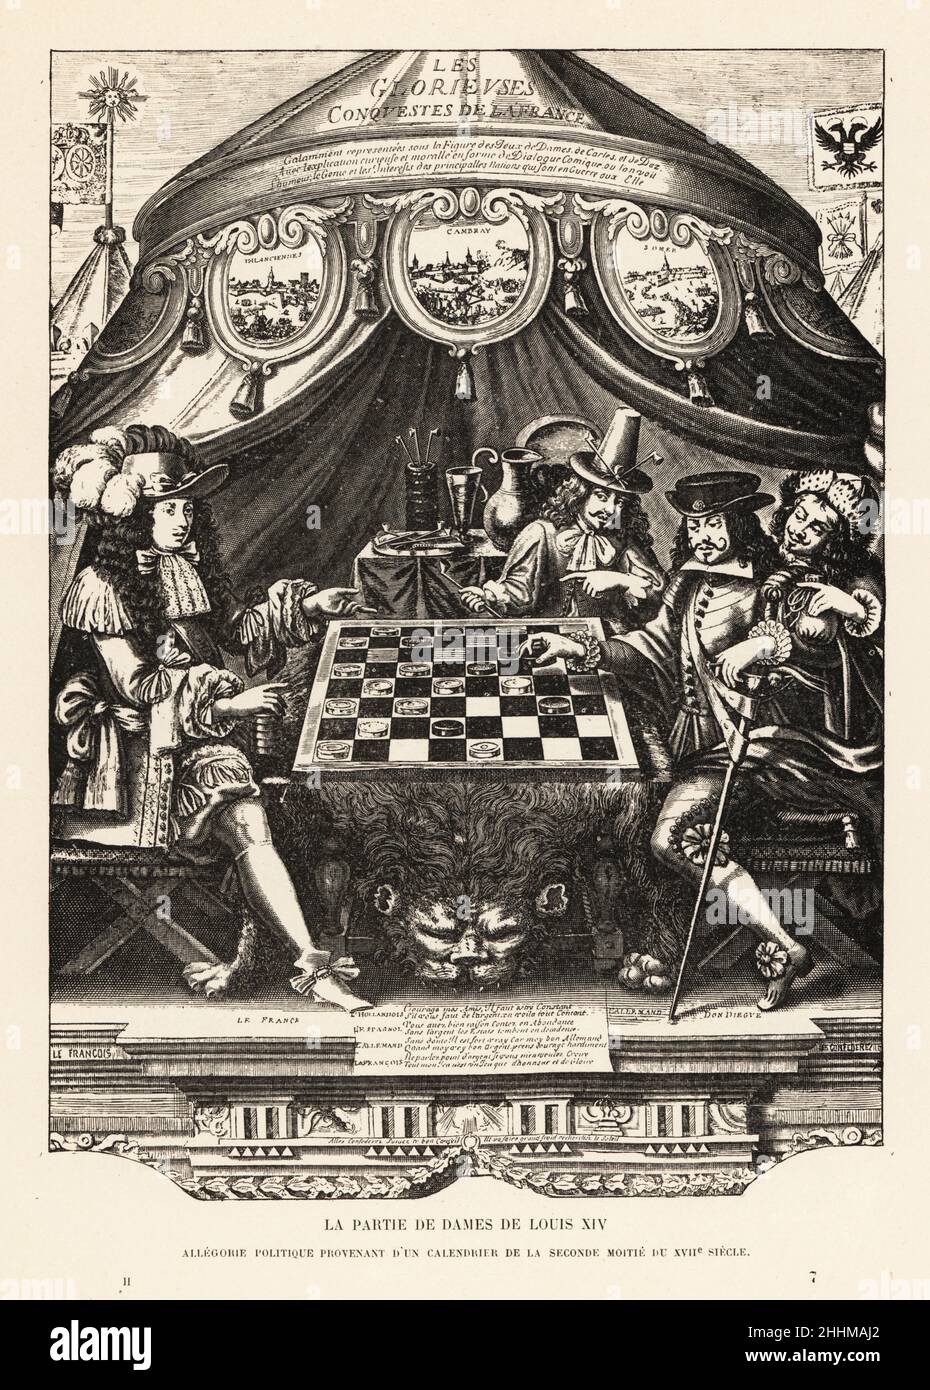 Allegorical print showing European politics as a game of draughts, from a 17th-century calendar. King Louis XIV of France (L) plays draughts on a lion-skin table against Don Diegue of Spain in a military camp. Spain is aided by Holland, with a purse of gold, and Germany with crossed tobacco pipes in his hat. Medallions of the Glorious Conquests of France: Valenciennes, Cambrai, Samer above. Le Partie de Dames de Louis XIV. Allegorie politique provenant d'un calendrier du XVIIe siecle. Lithograph from Henry Rene d’Allemagne’s Recreations et Passe-Temps, Games and Pastimes, Hachette, Paris, 1906 Stock Photo